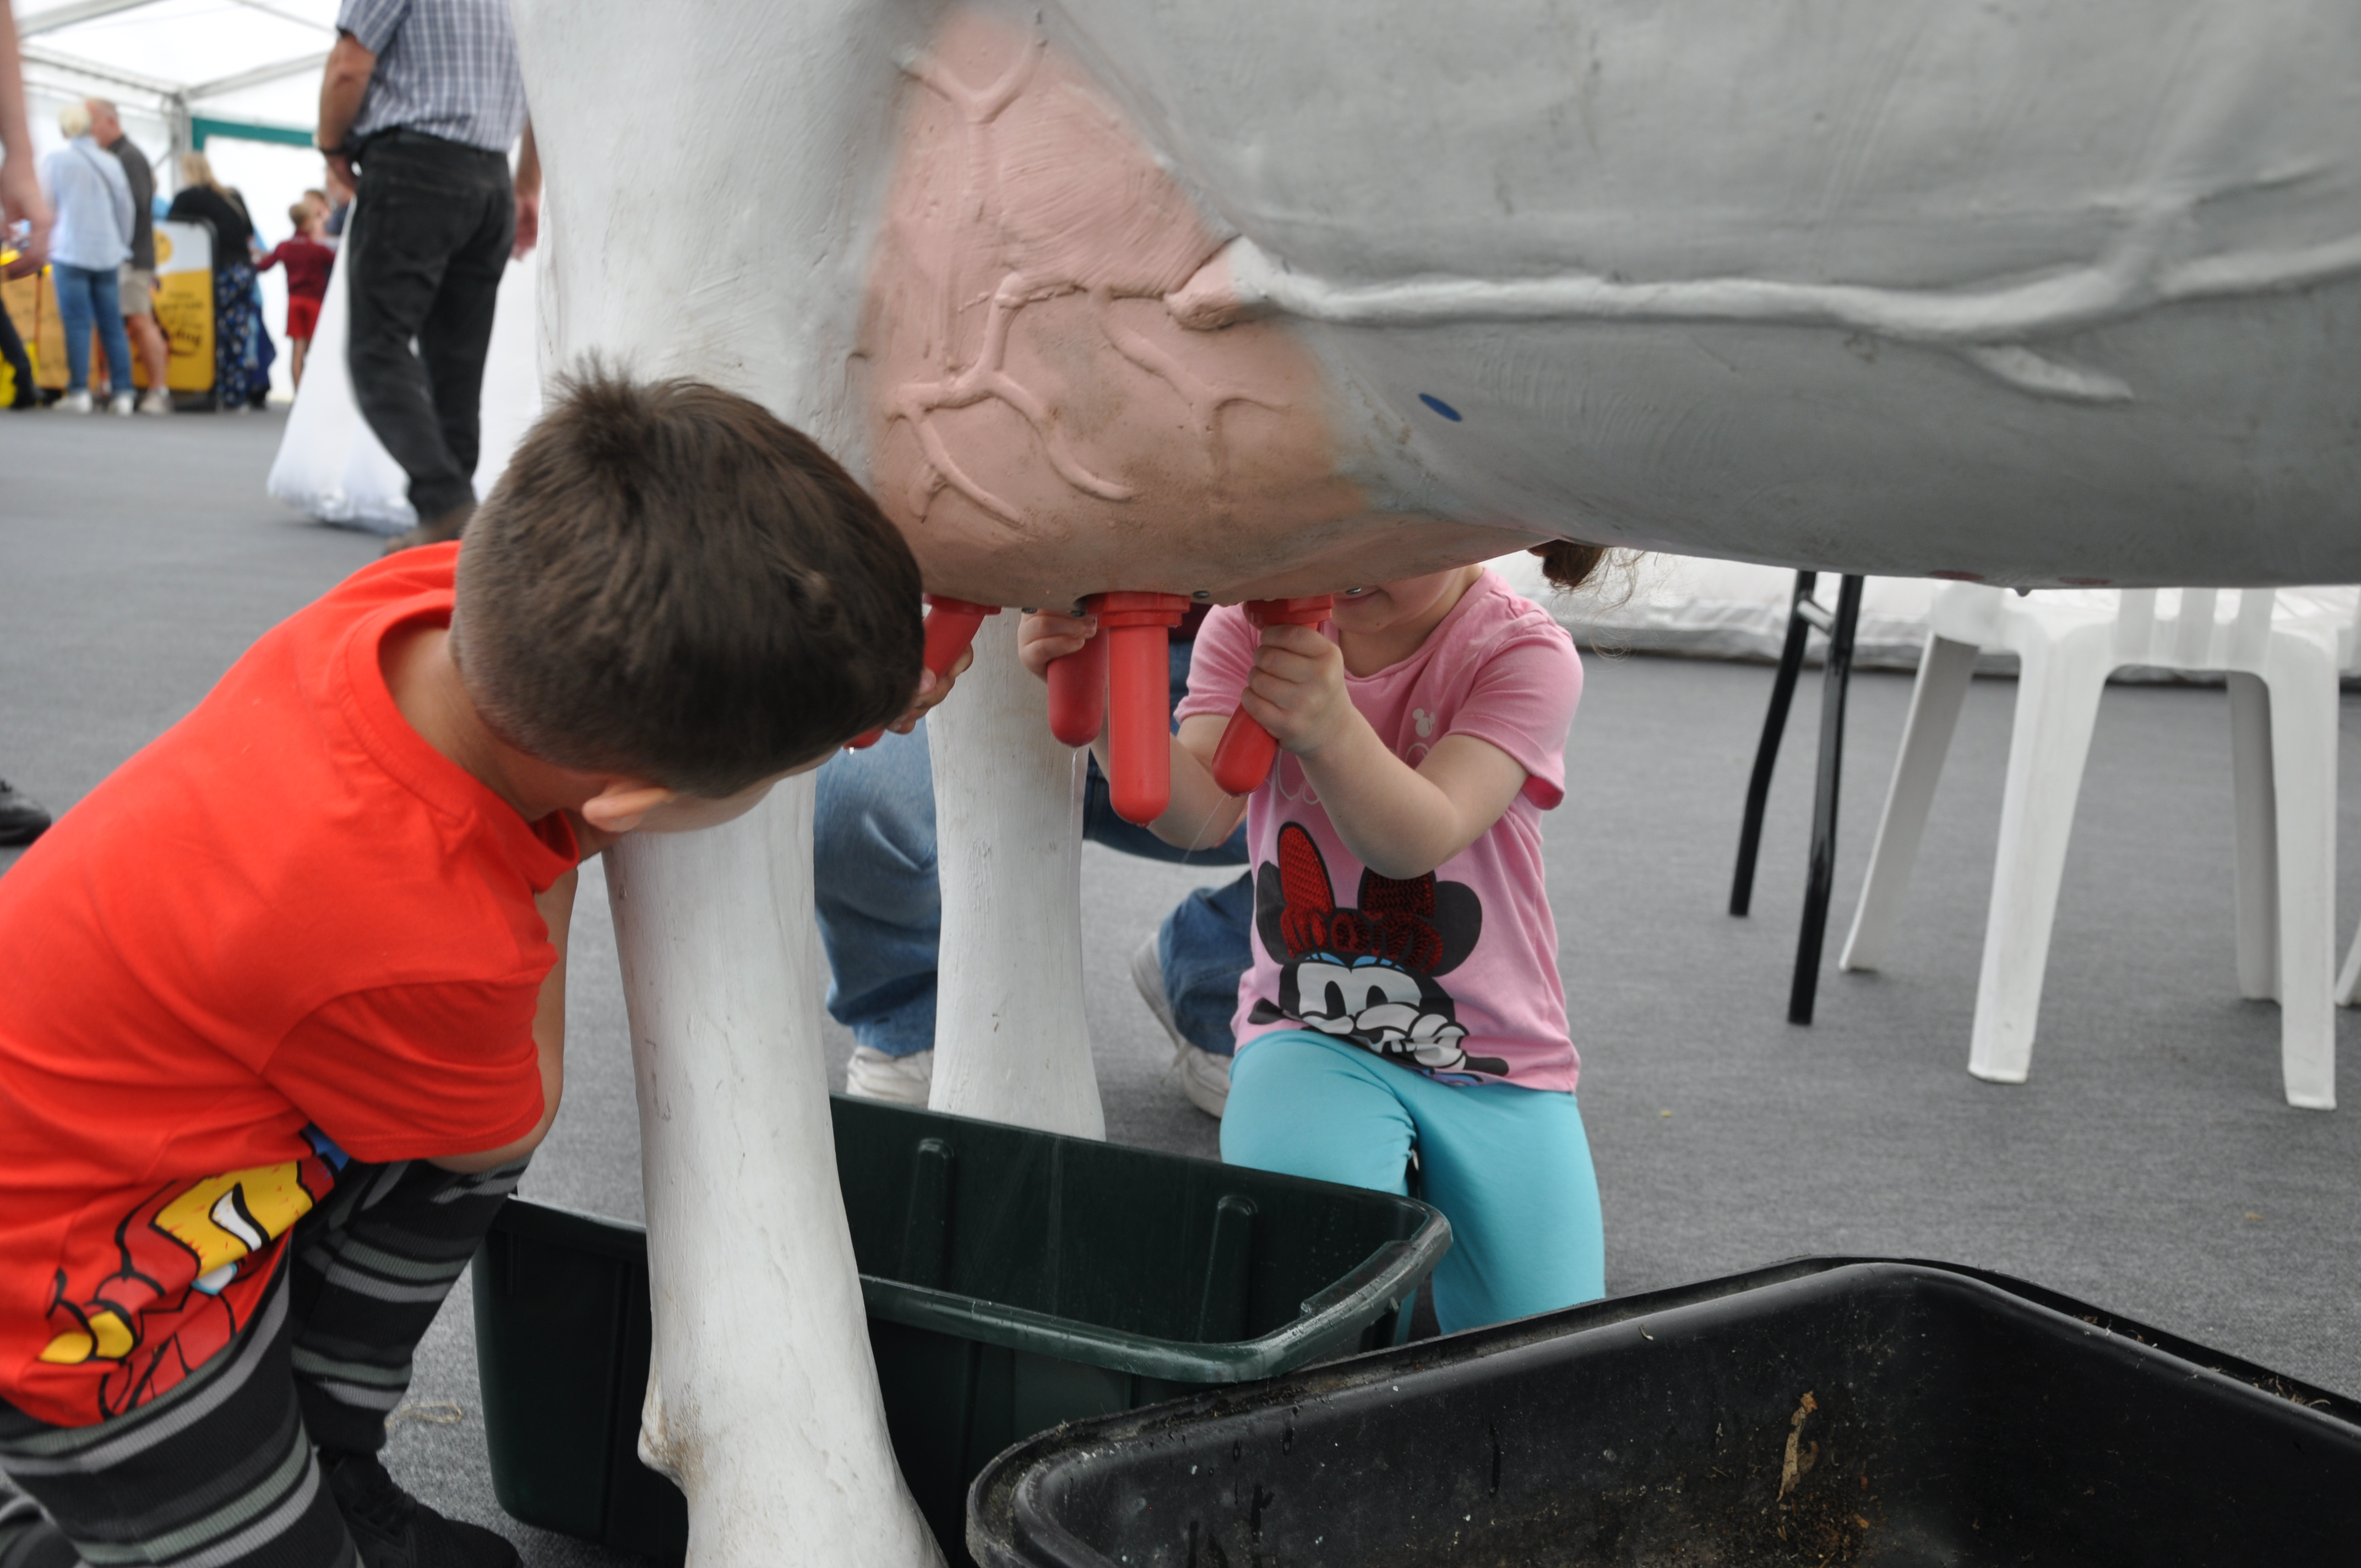 Young children simulate milking a cow